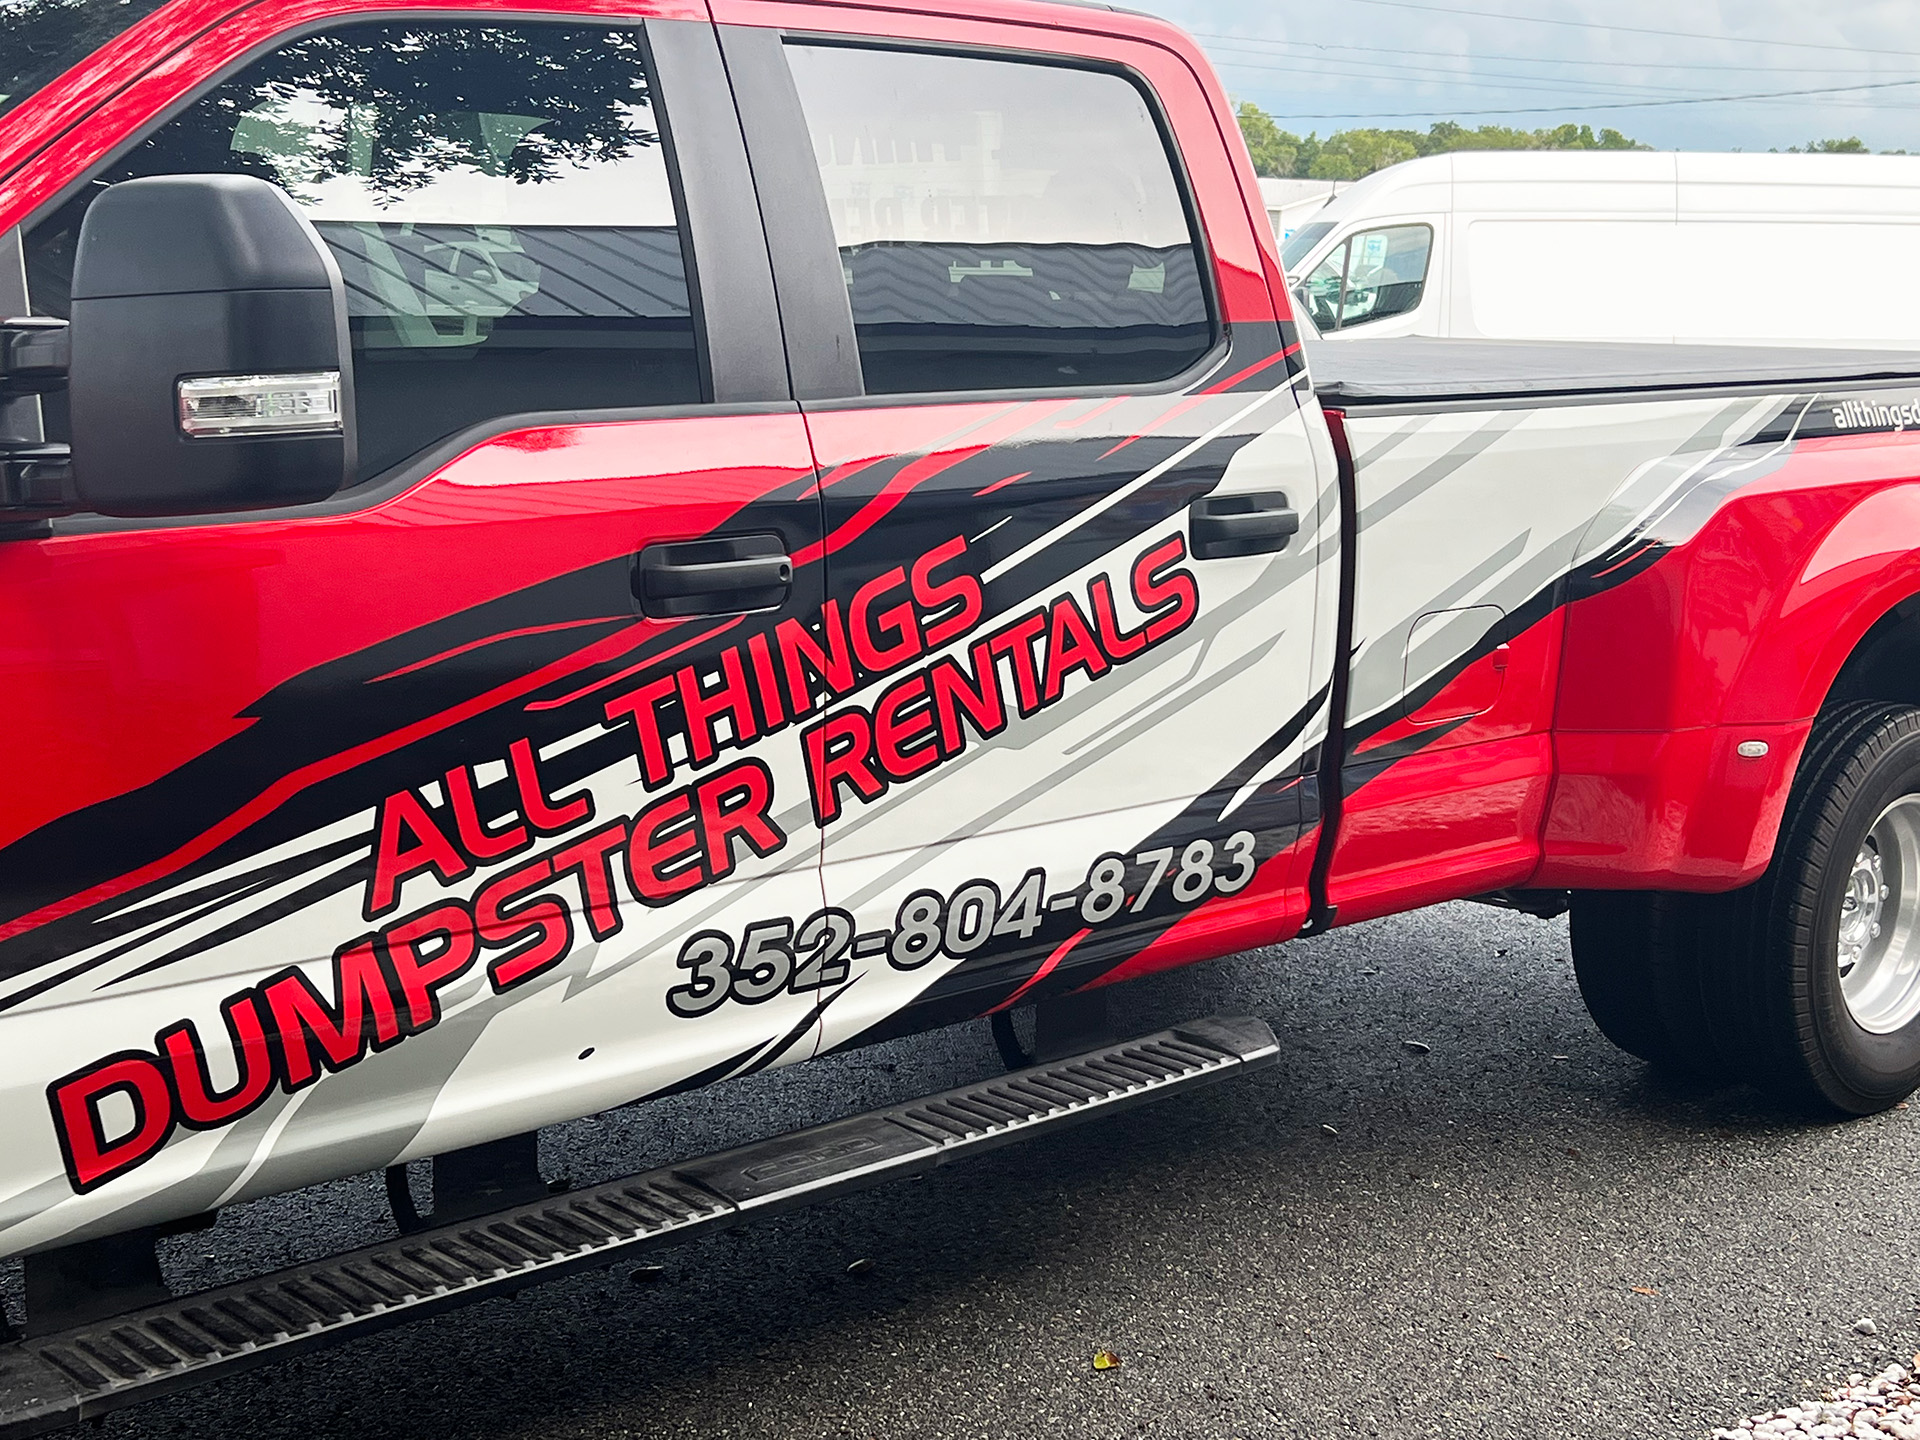 Silver Springs FL Moving Dumpsters Near Me